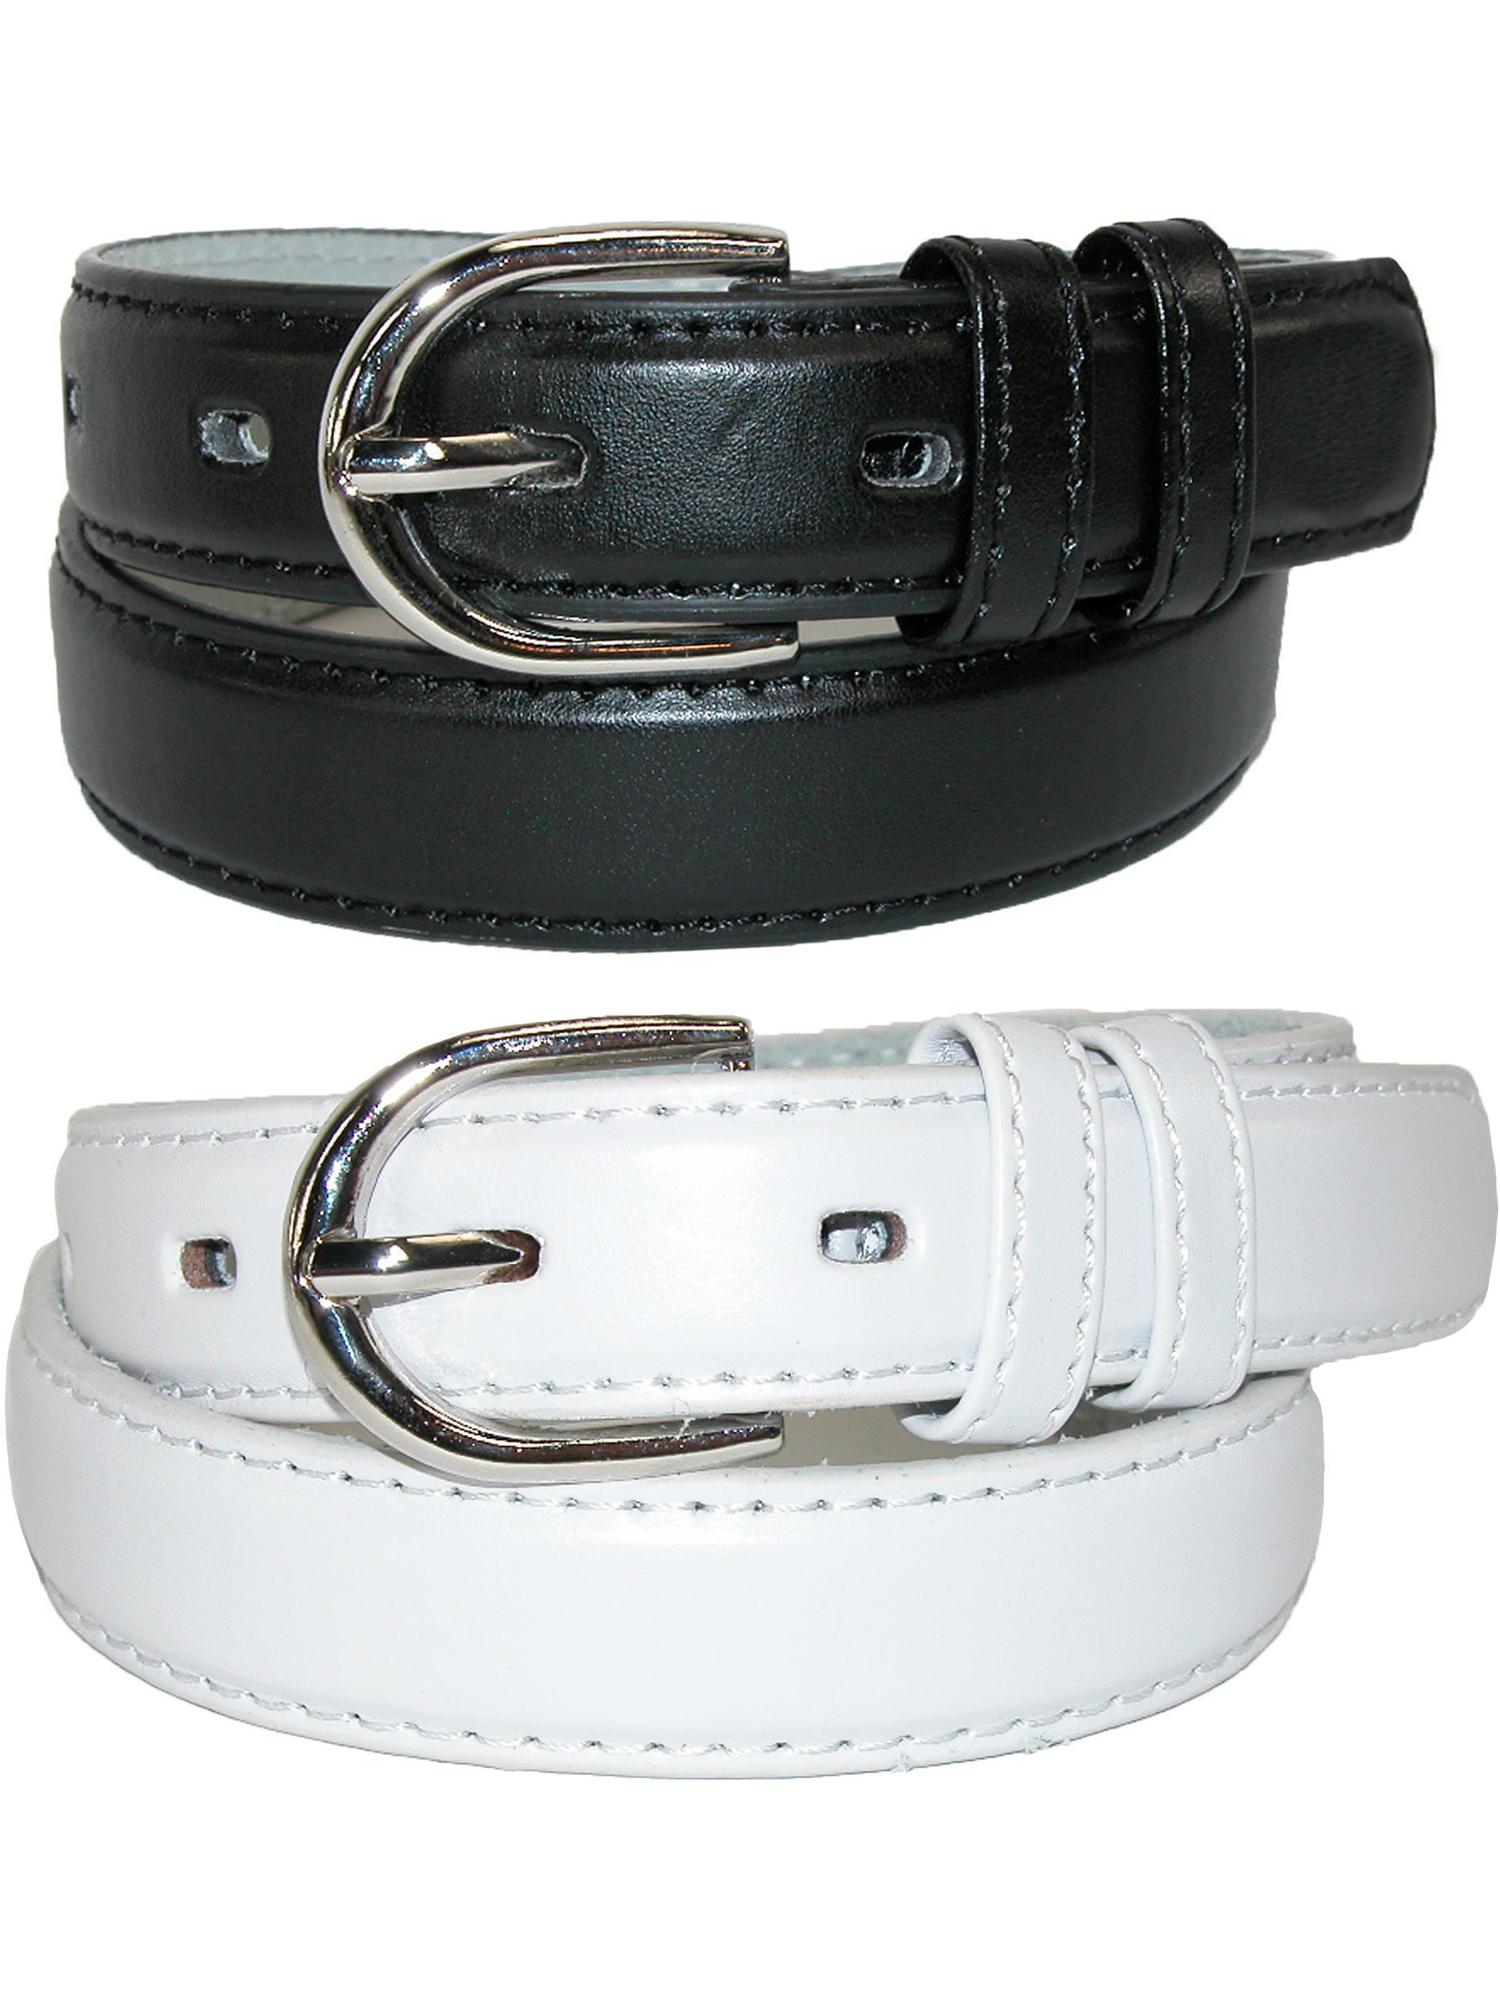 CTM/® Kids Basic Leather Dress Belt Pack of 2 Colors Black and Brown Small